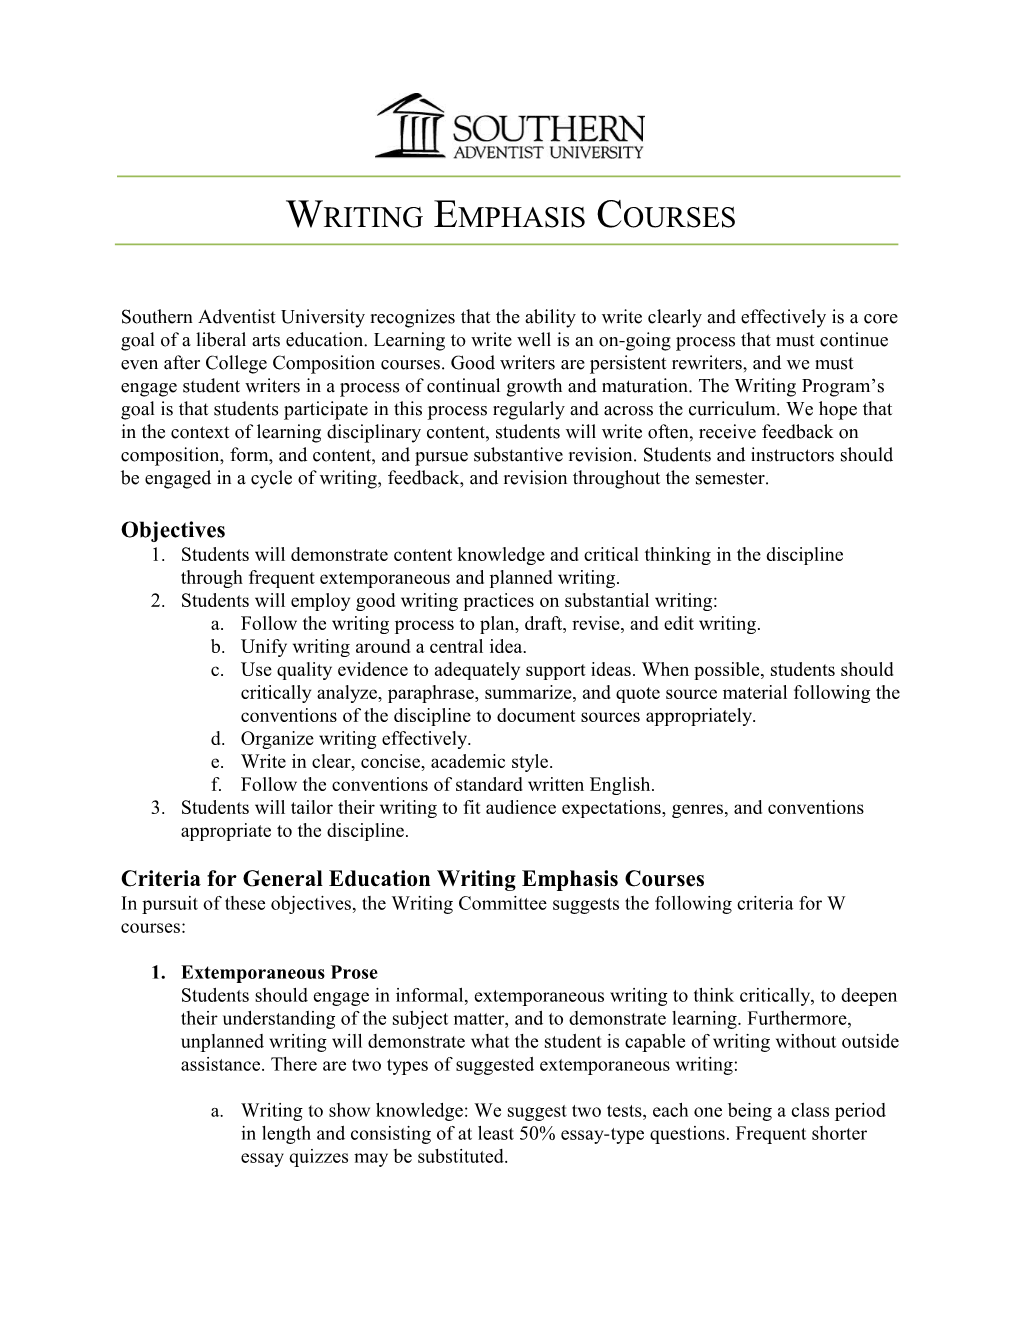 Writing Emphasis Courses